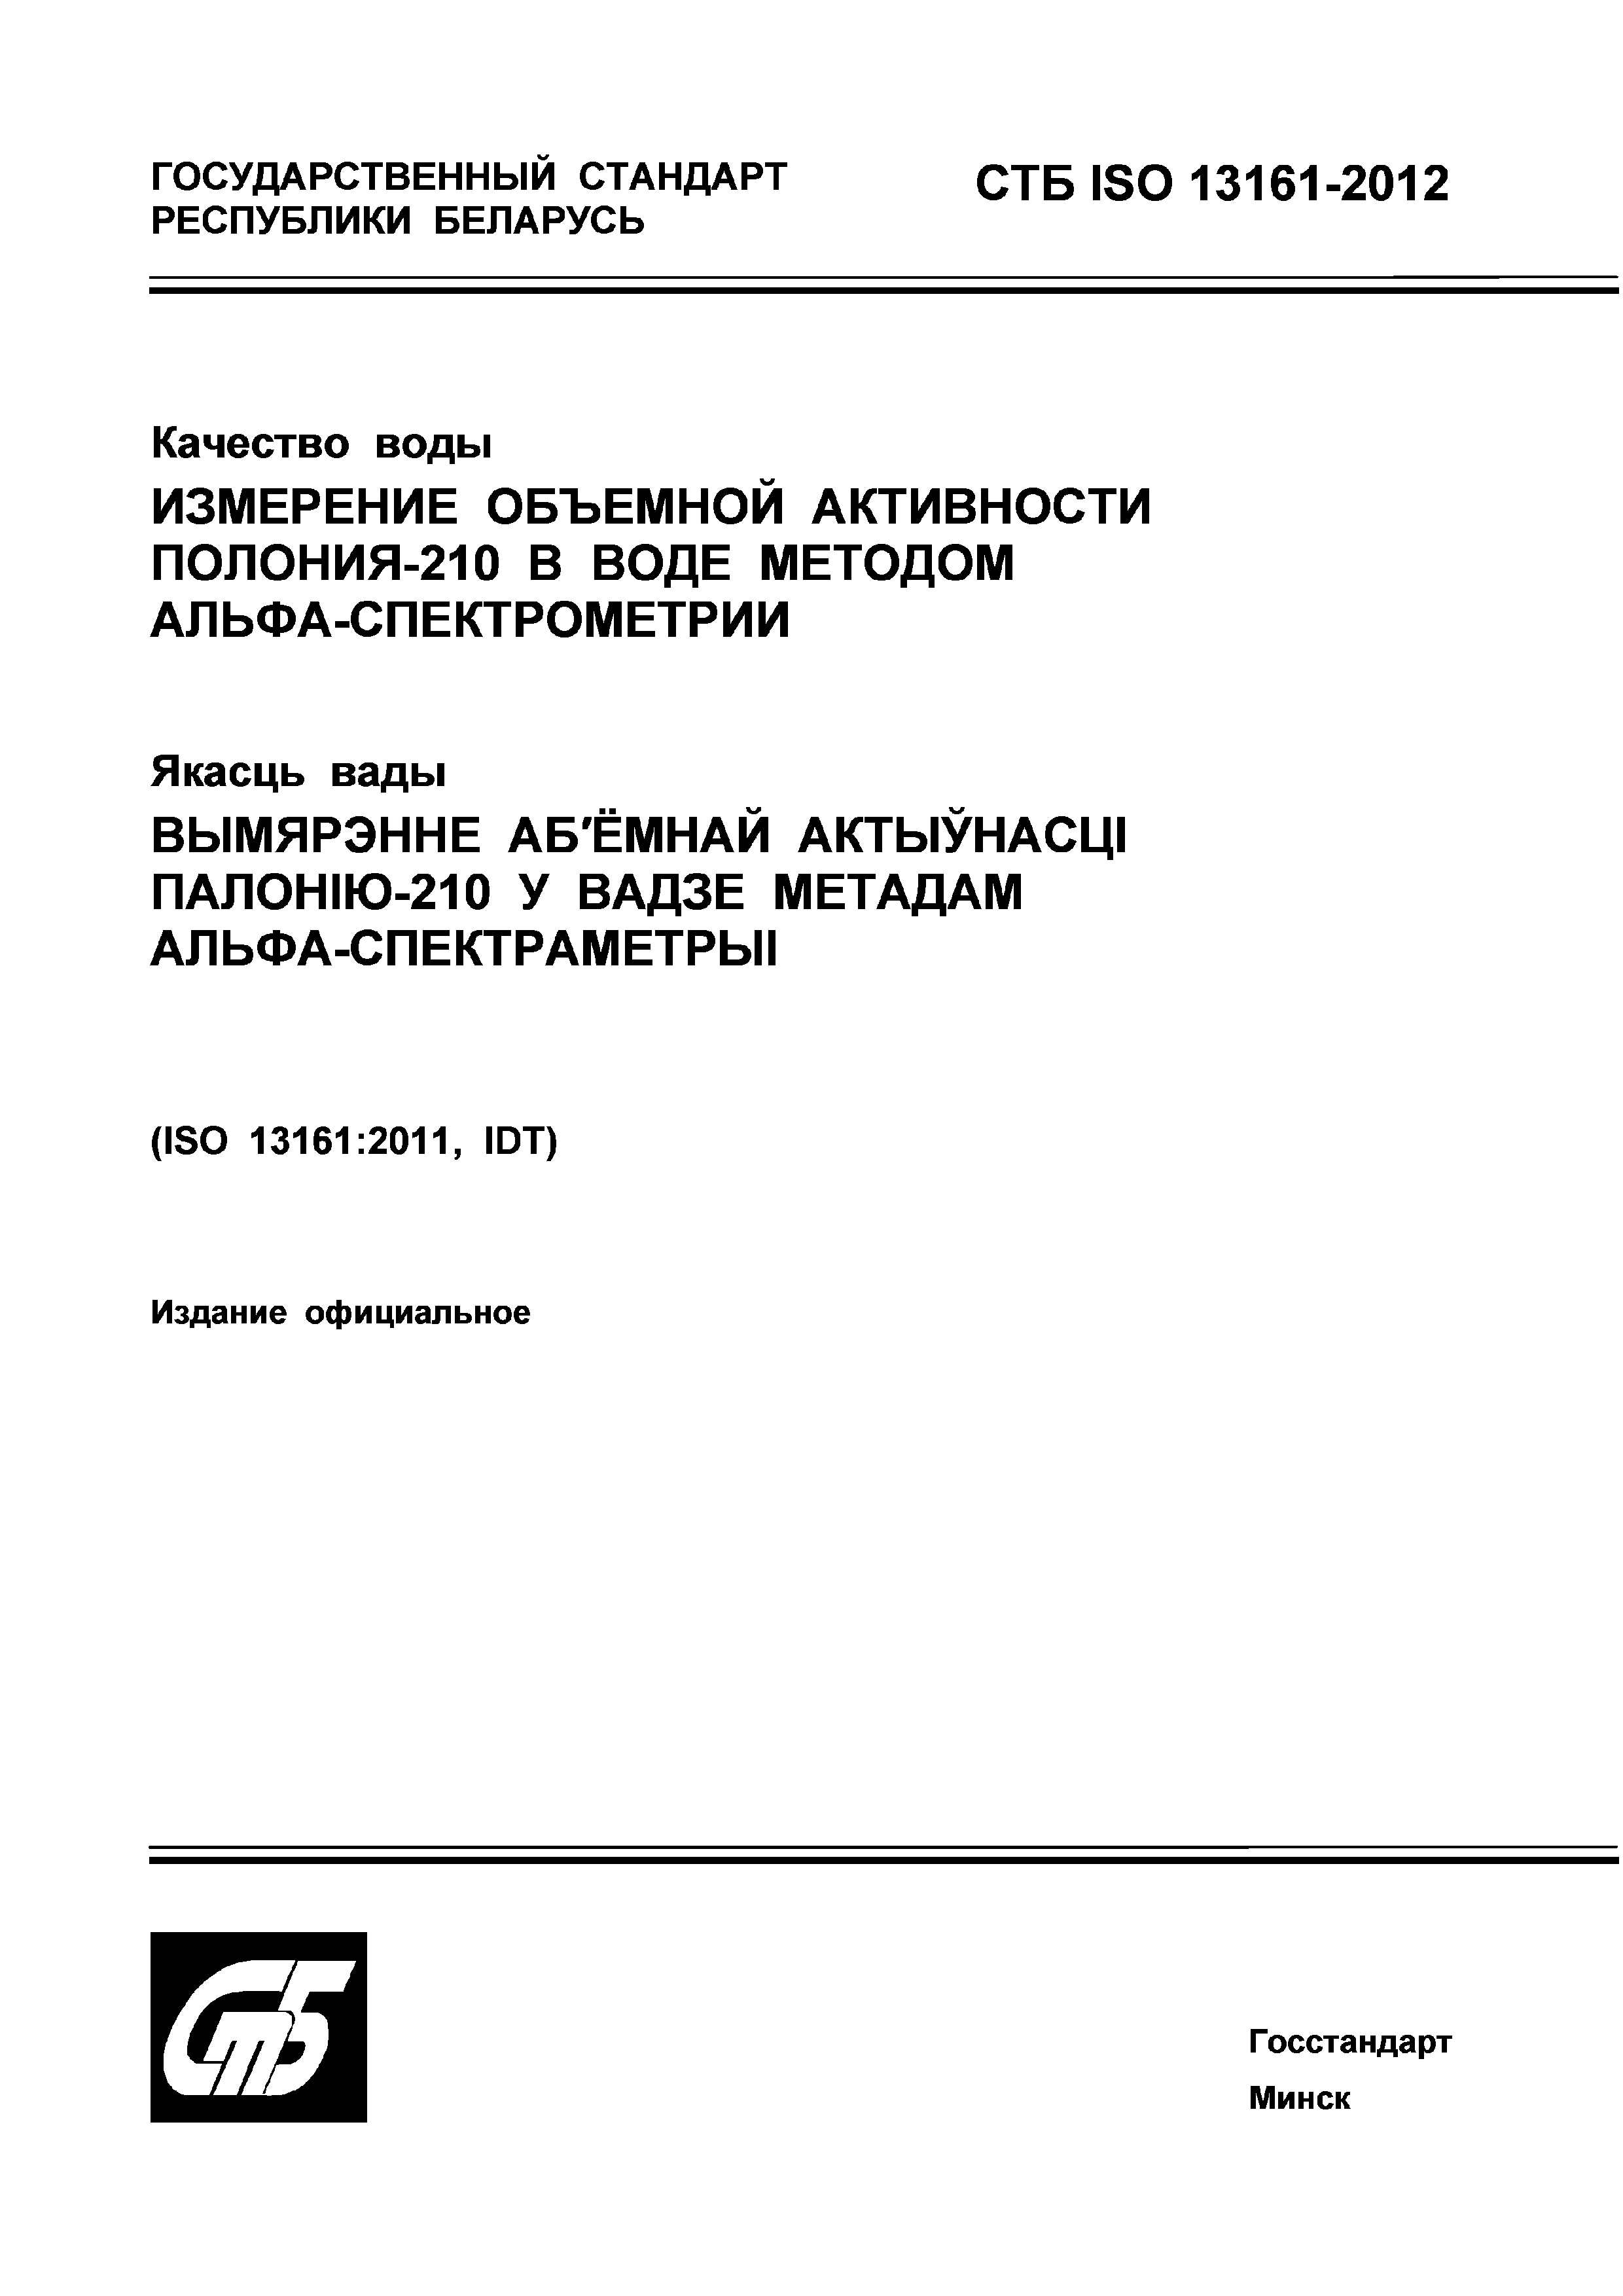 СТБ ISO 13161-2012